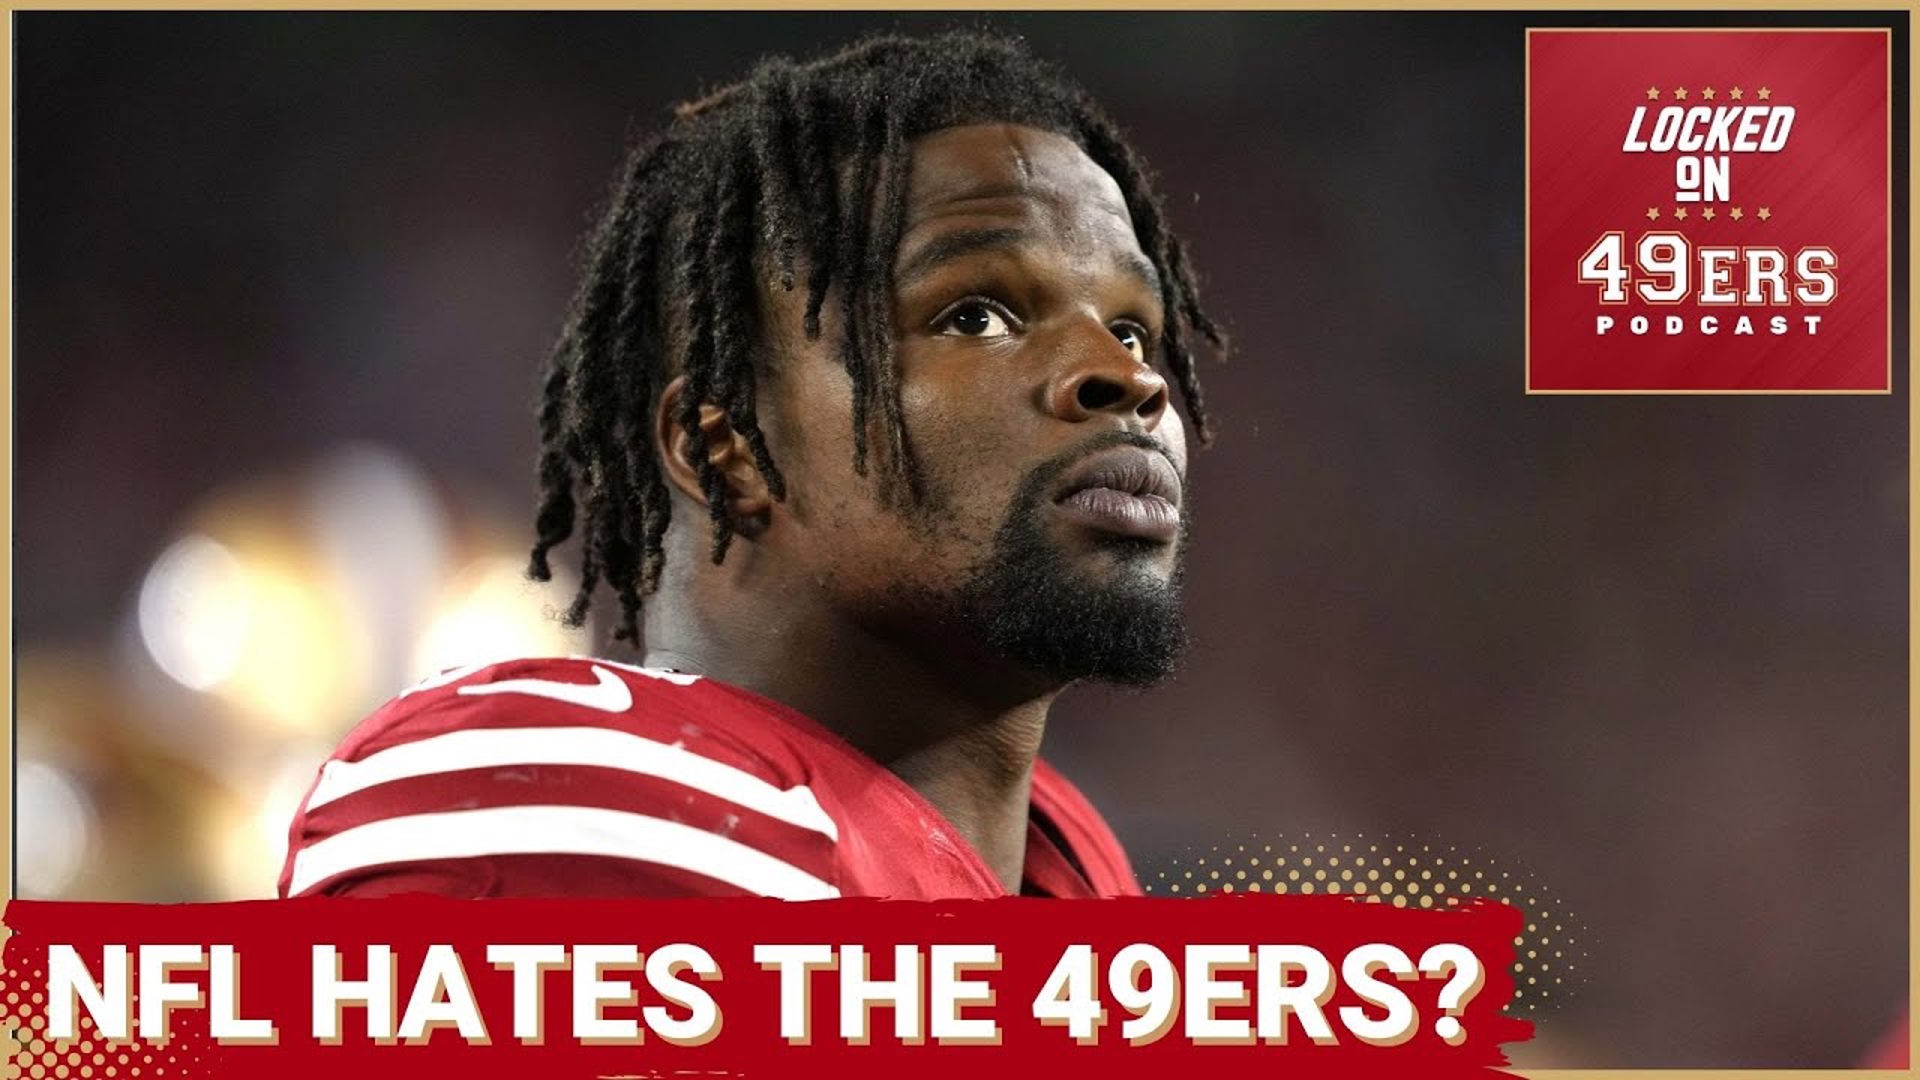 Back-to-back years the 49ers have had a huge rest disadvantage -- is the NFL purposely making it difficult on the San Francisco 49ers?